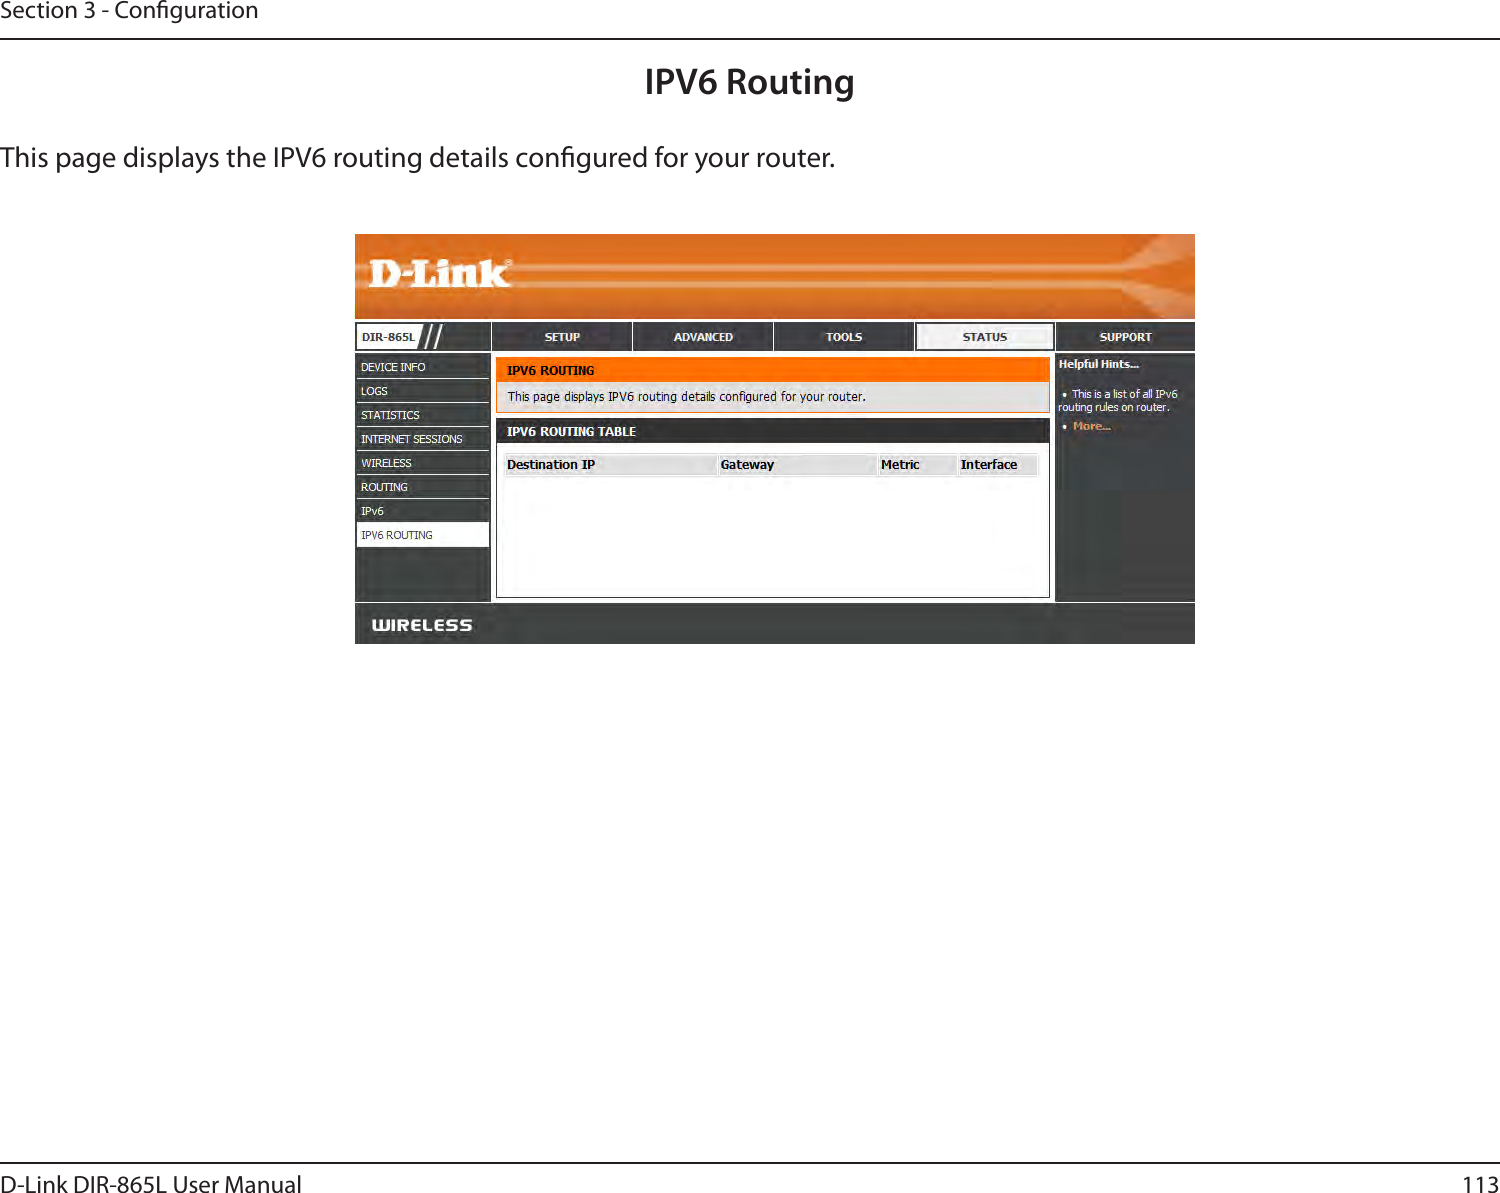 113D-Link DIR-865L User ManualSection 3 - CongurationIPV6 RoutingThis page displays the IPV6 routing details congured for your router. 